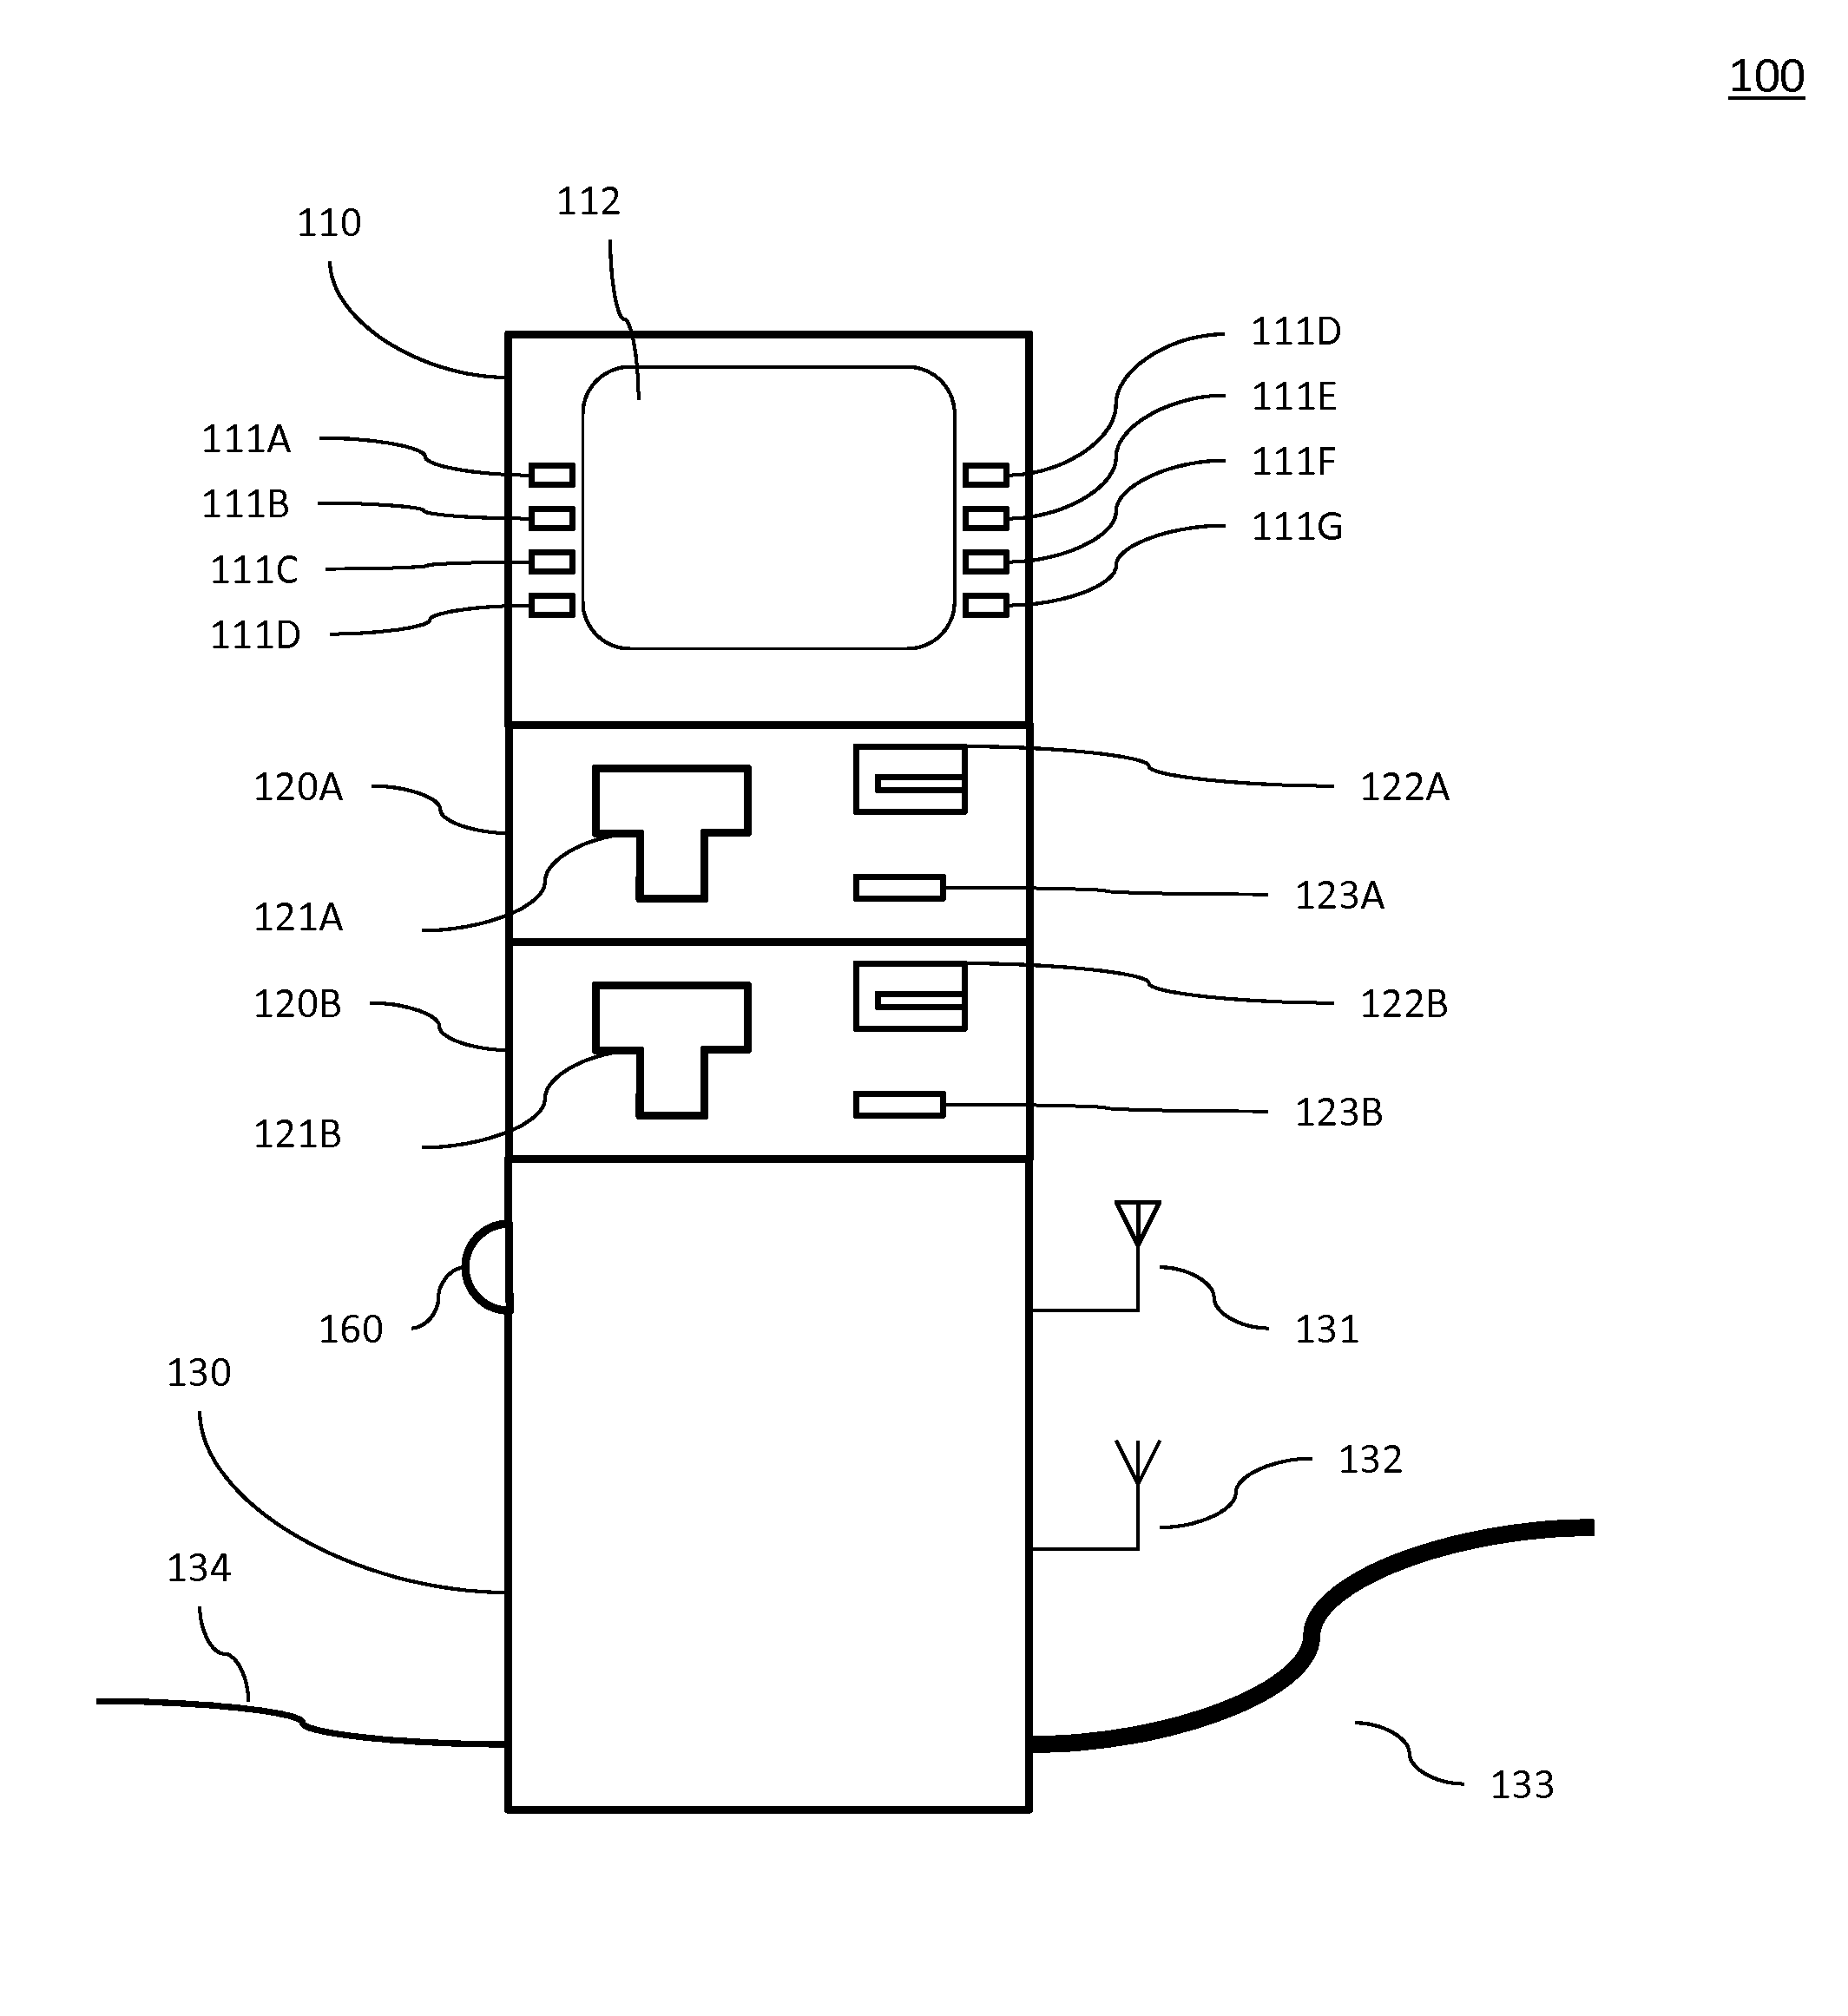 Method and apparatus for improving access to an ATM during a disaster